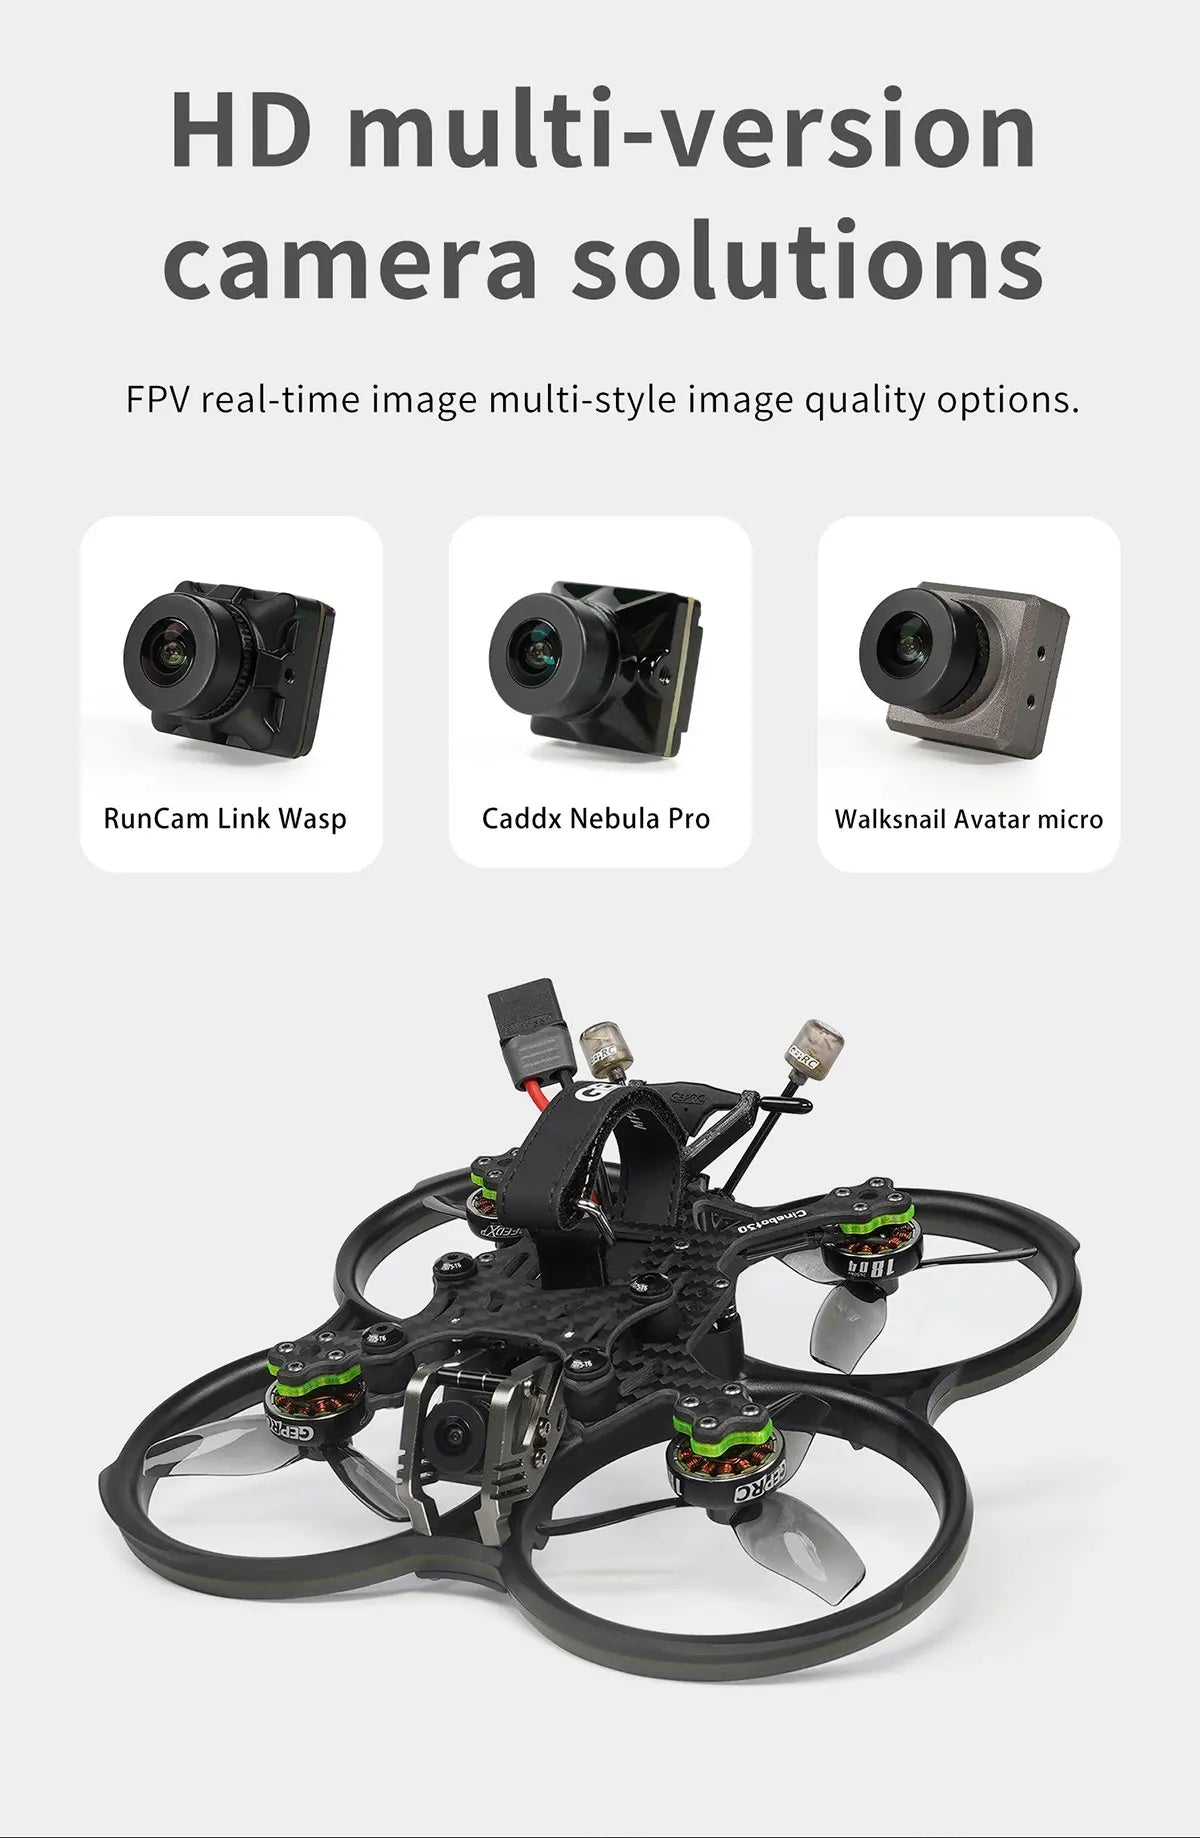 GEPRC Cinebot30 HD - Walksnail Avatar FPV, GEPRC Cinebot30 HD, HD multi-version camera solutions FPV real-time image quality options . RunC